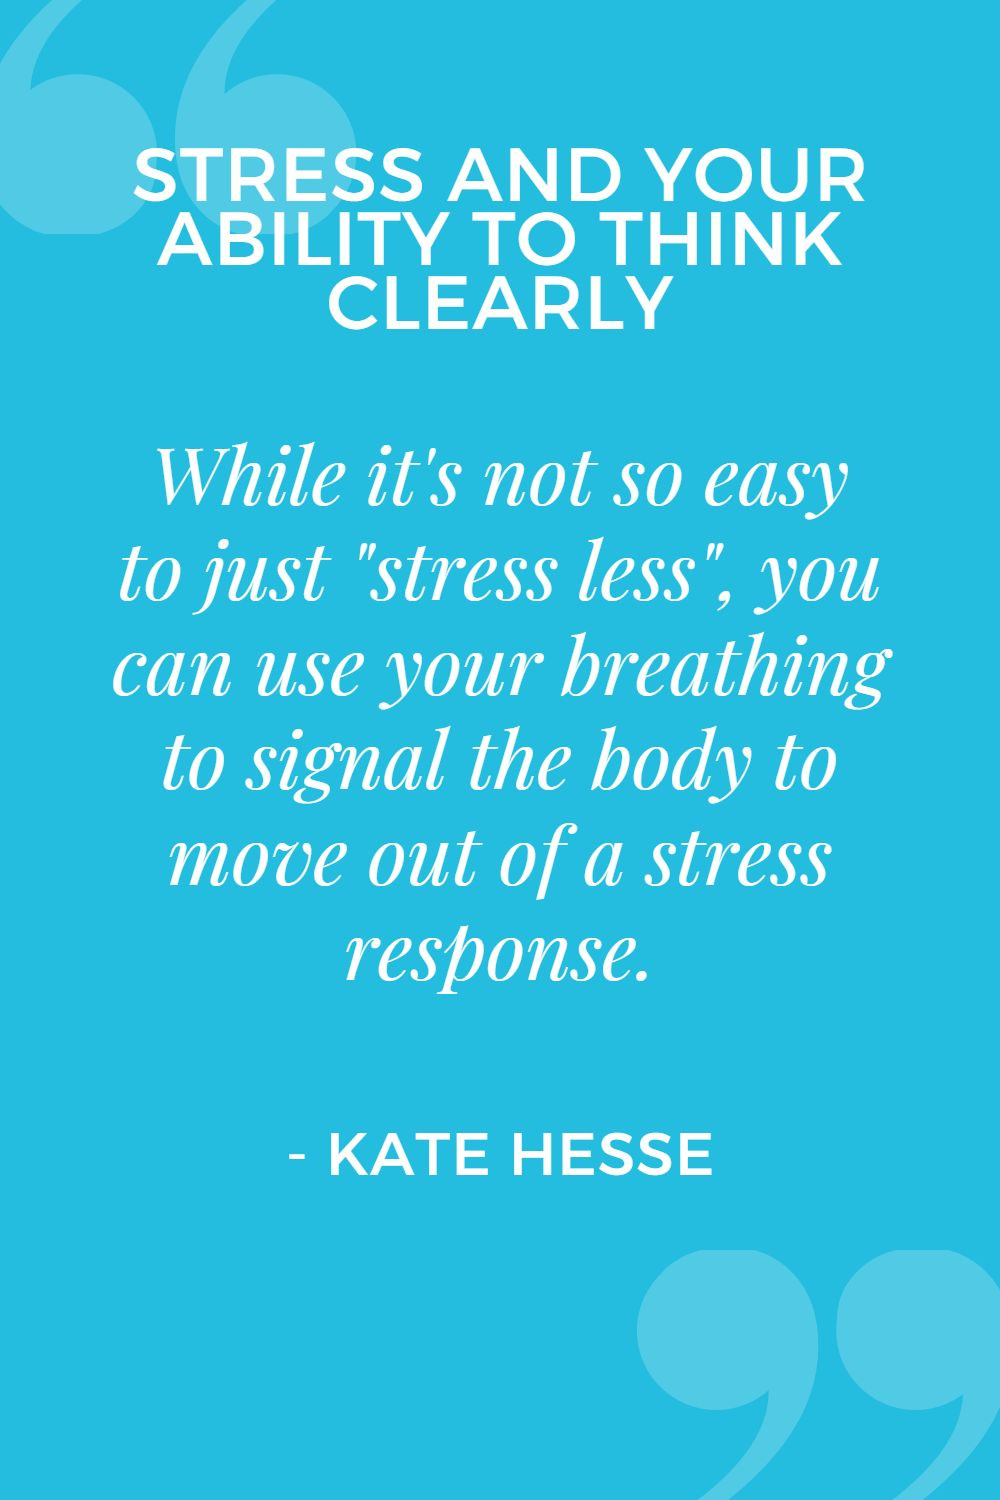 While it's not so easy to just "stress less", you can use your breathing to signal the body to move out of a stress response.